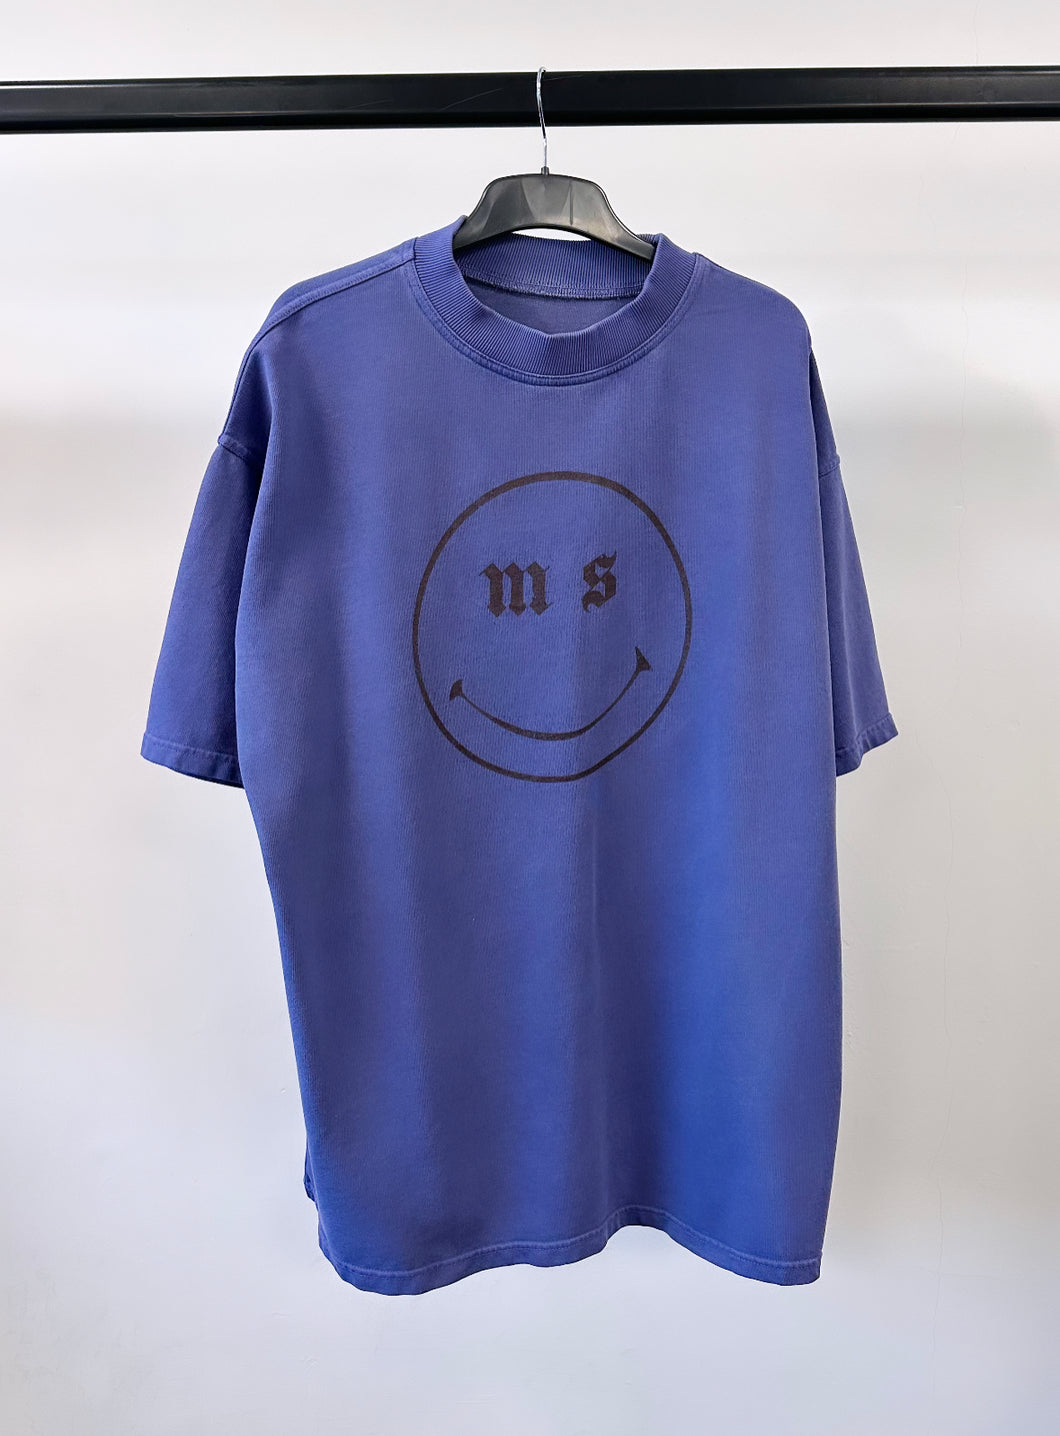 Washed Purple Smiley Heavyweight T-shirt.